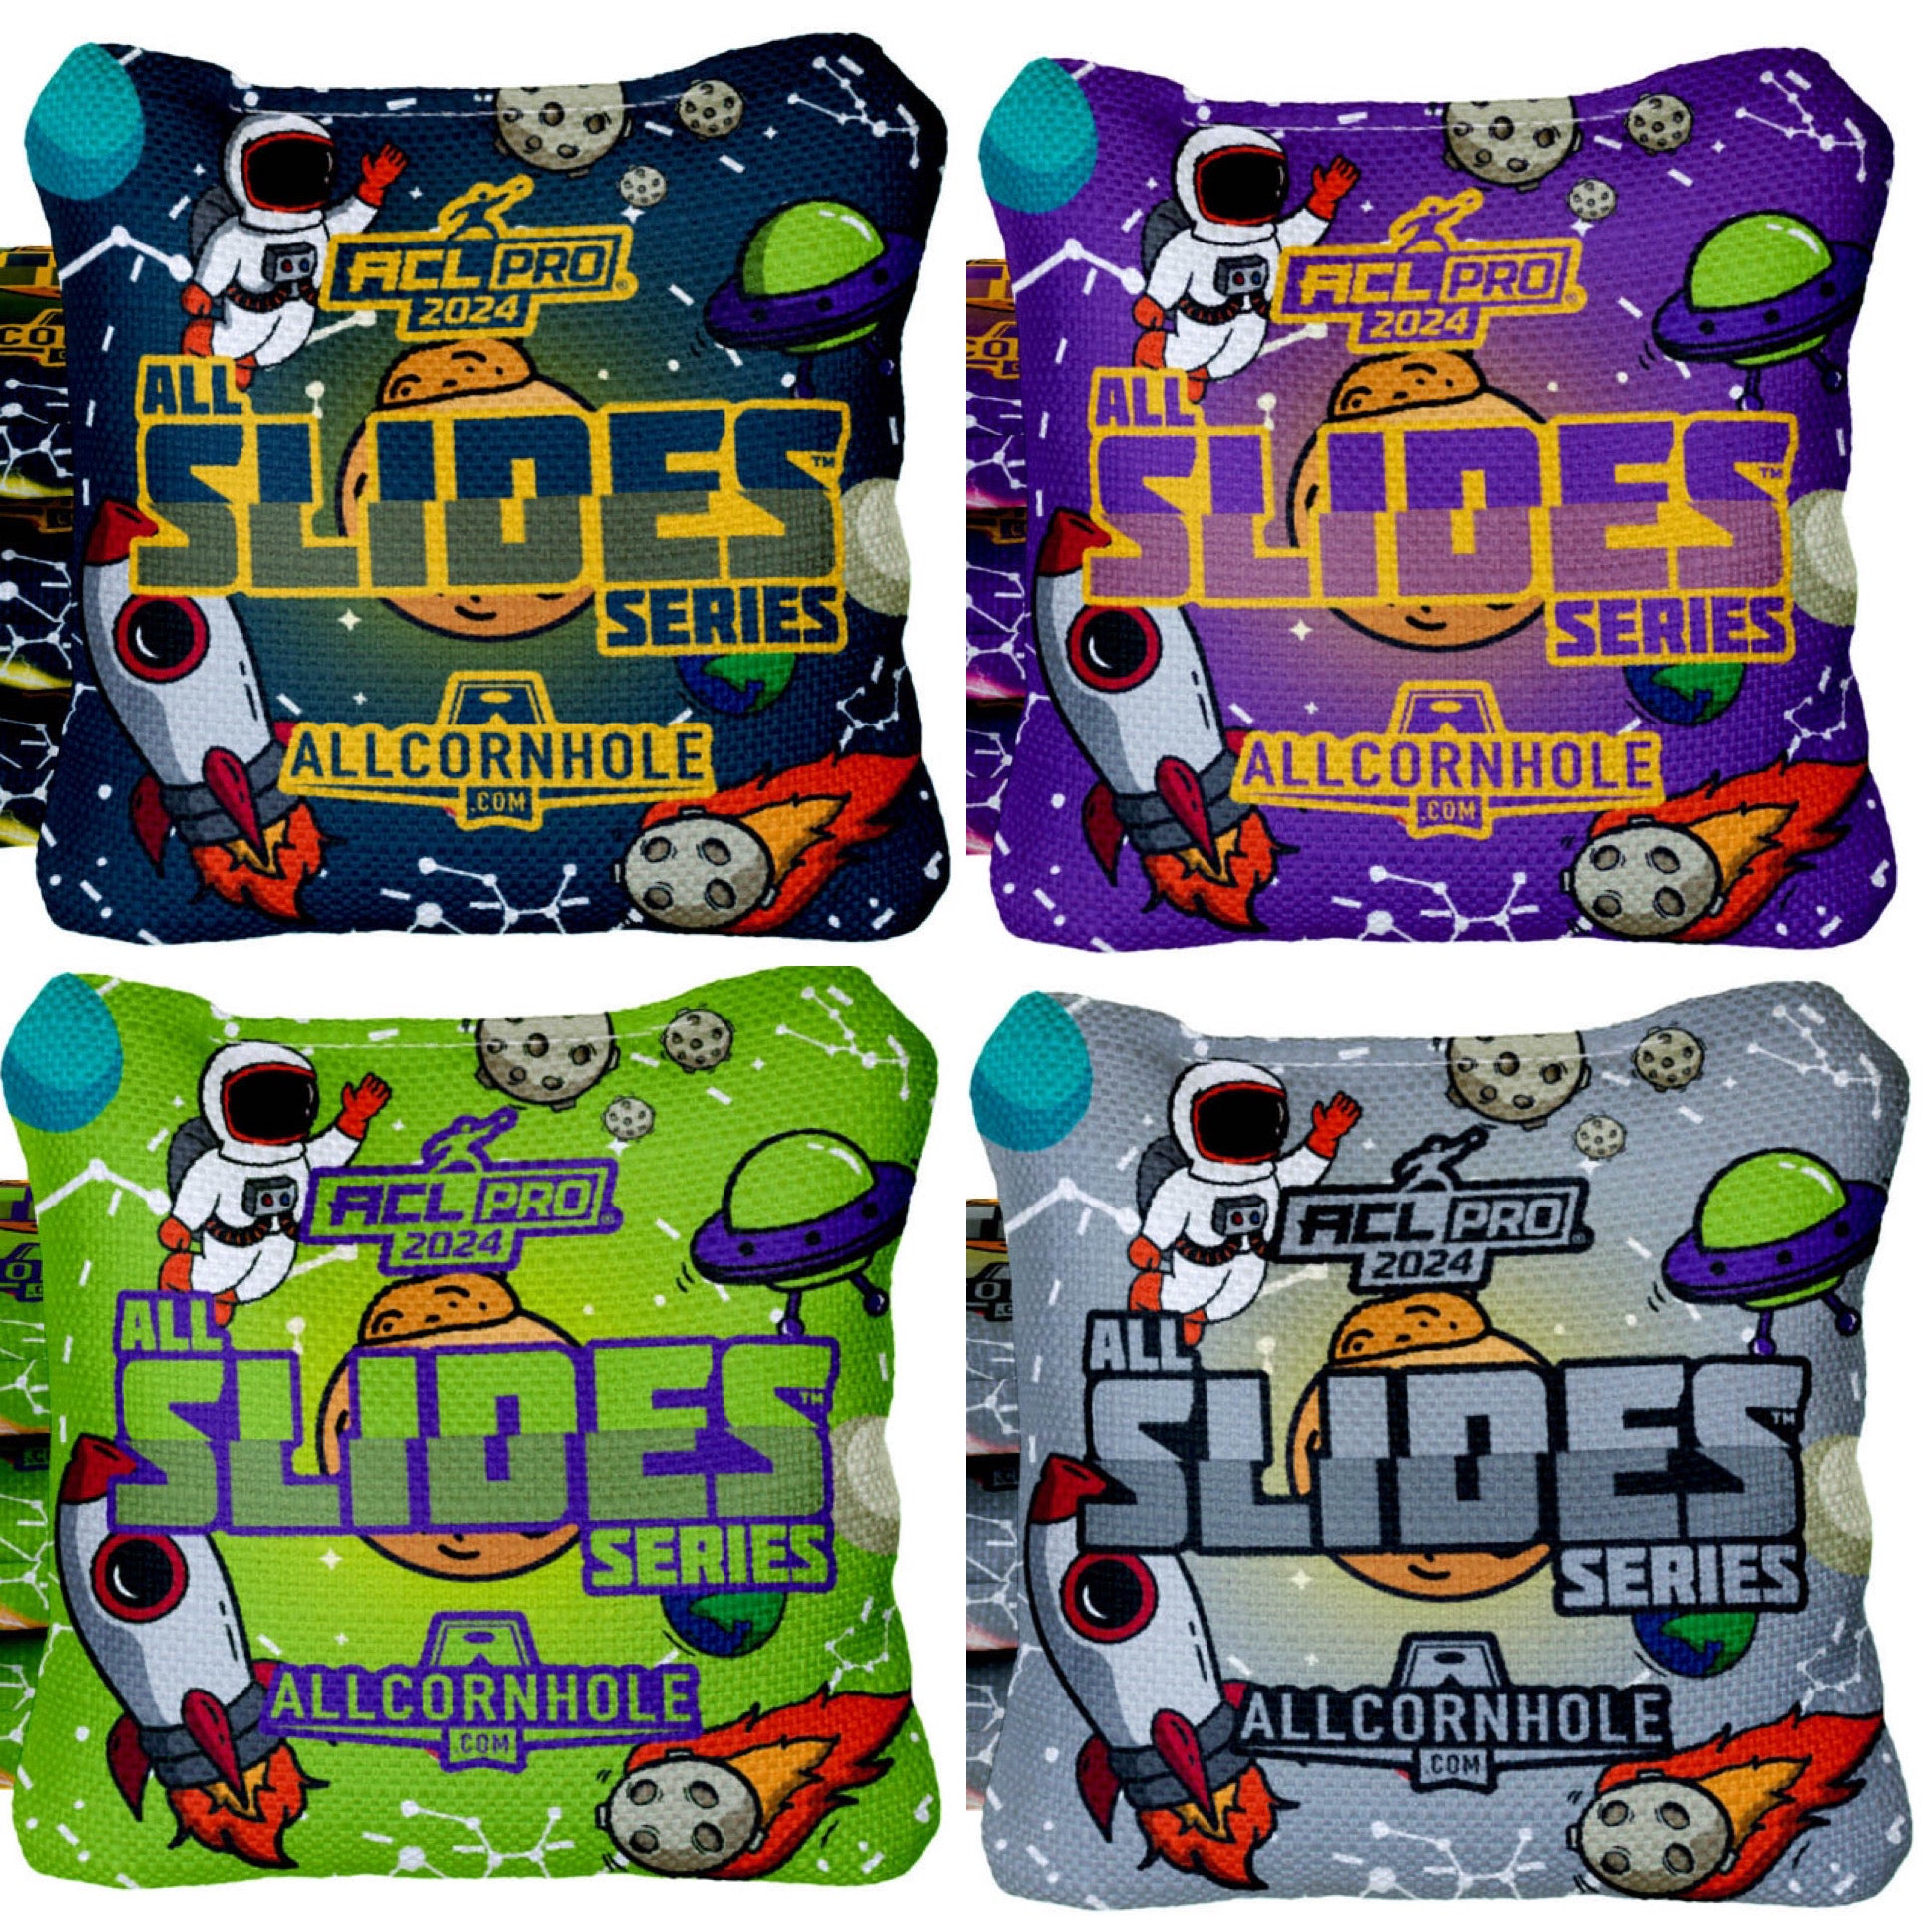 2024 AllCornhole All-Slide Cornhole Bags - "Out of This World" - Set of 4 Bags